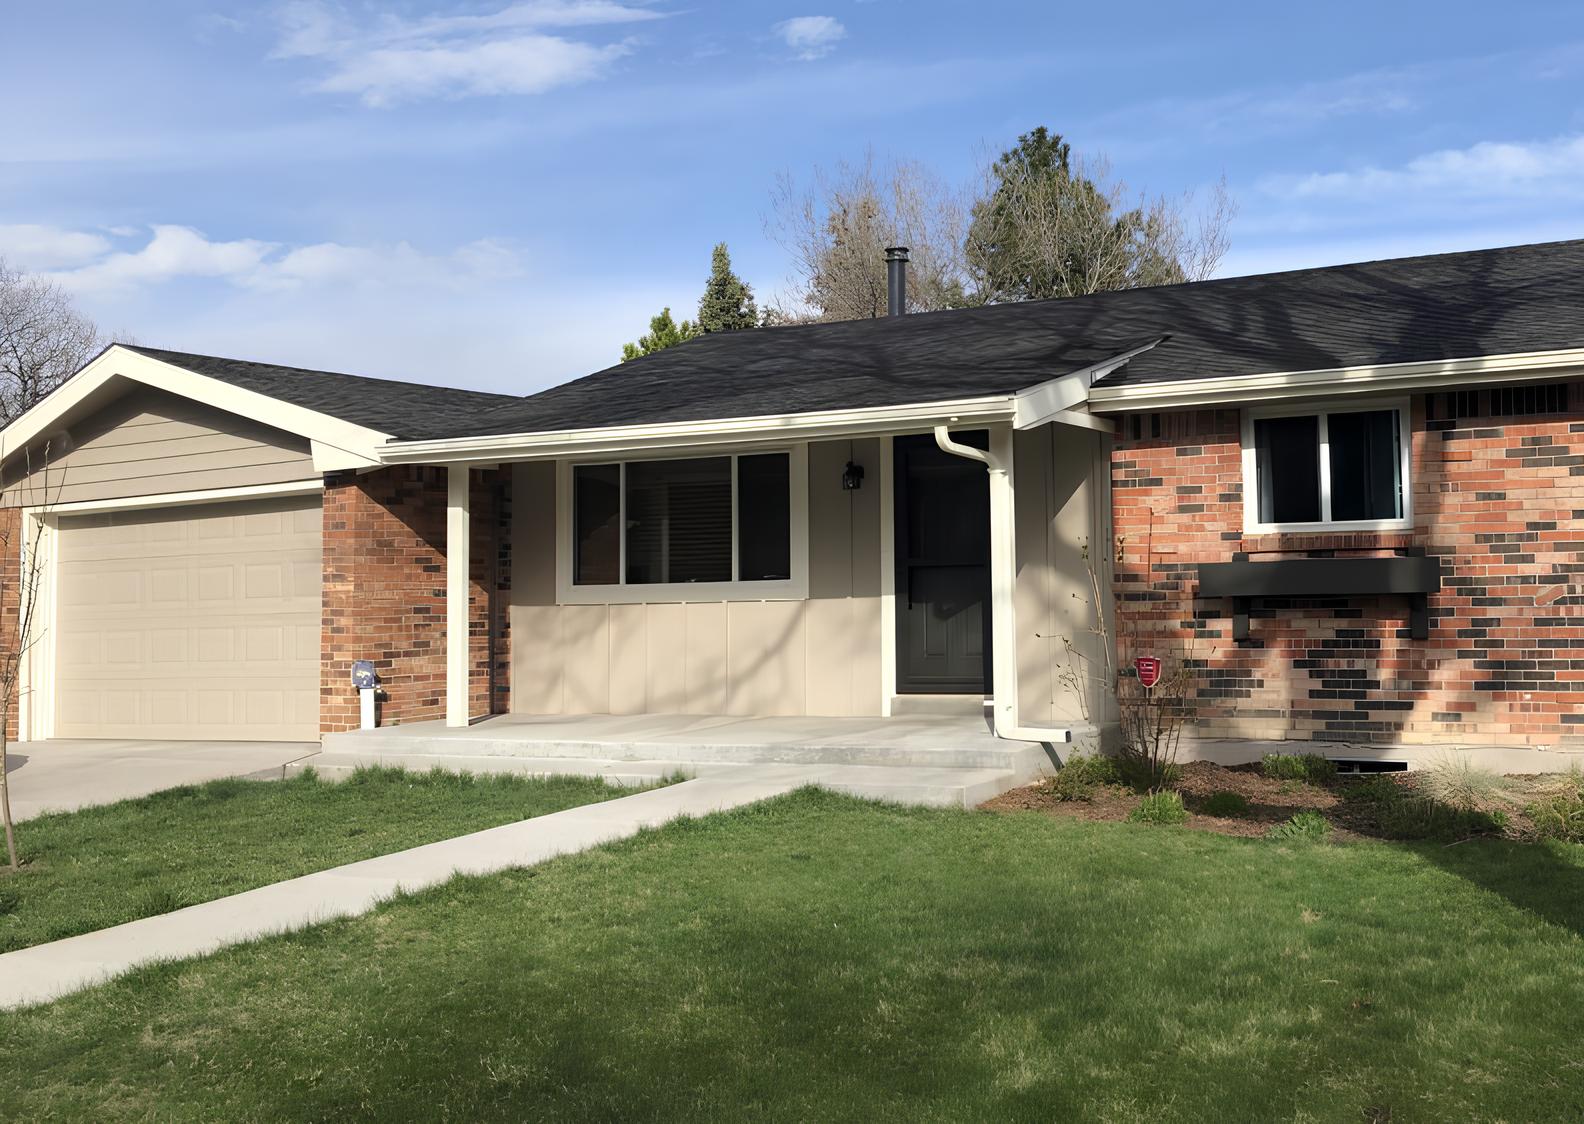 Single Story Home Repaint in Arvada, CO After